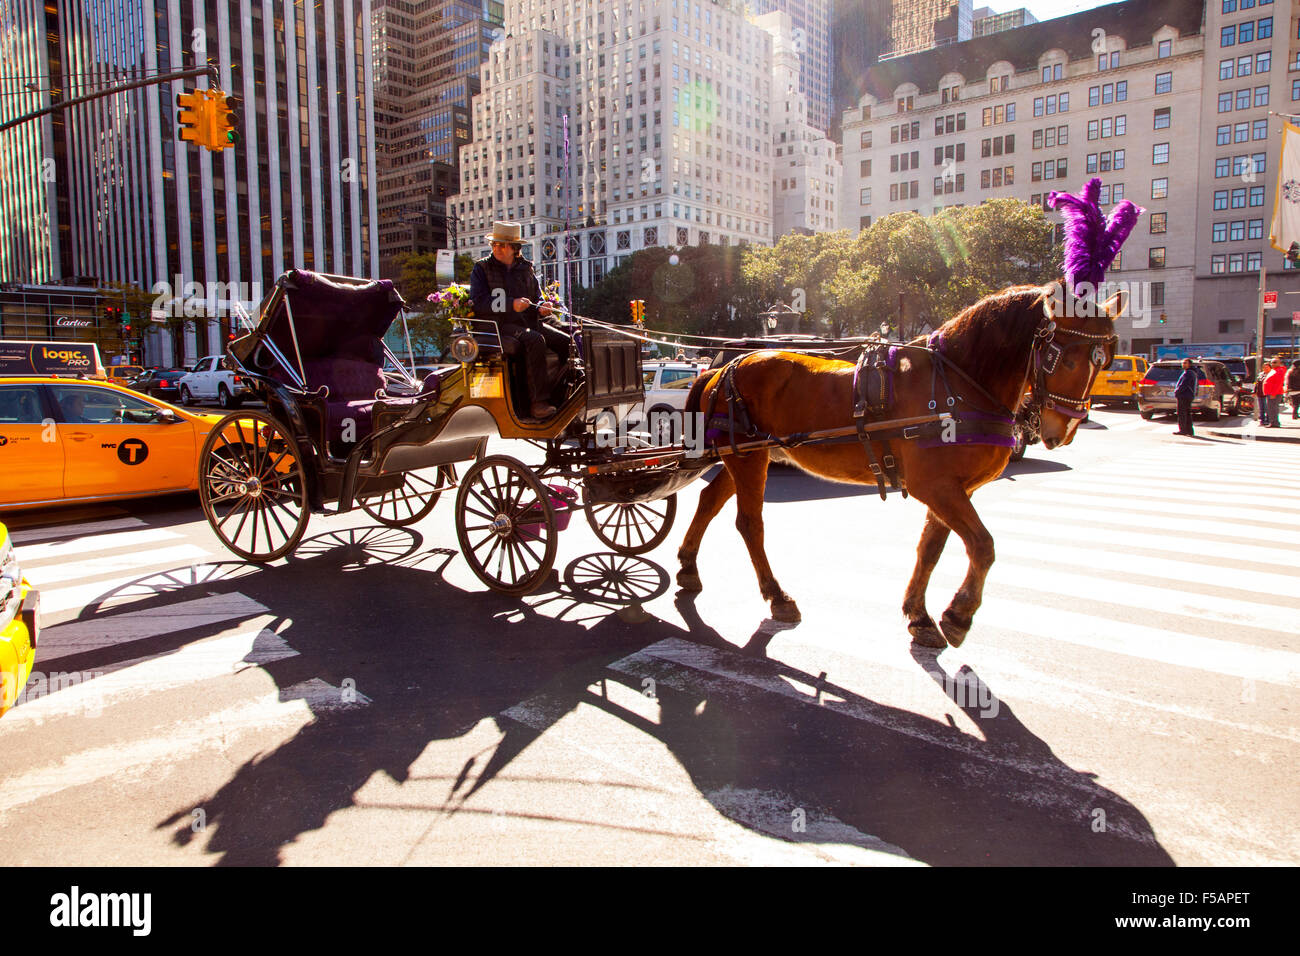 Central Park horse and carriage waiting to pick up a customer .W 59th Street, New York City, United States of America. Stock Photo